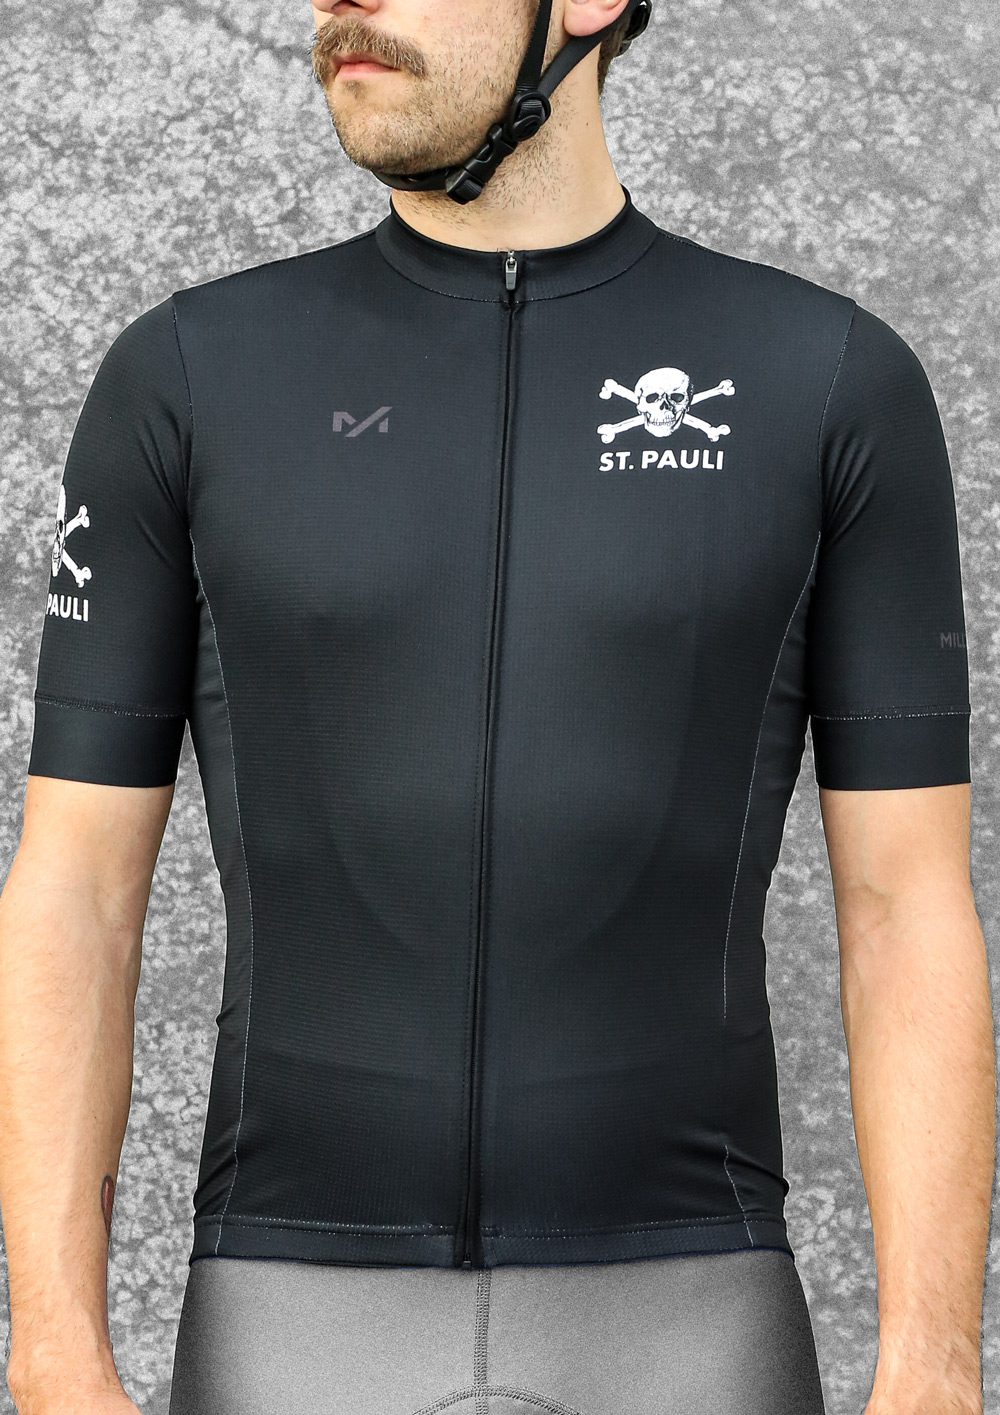 Cycling jersey recycled material